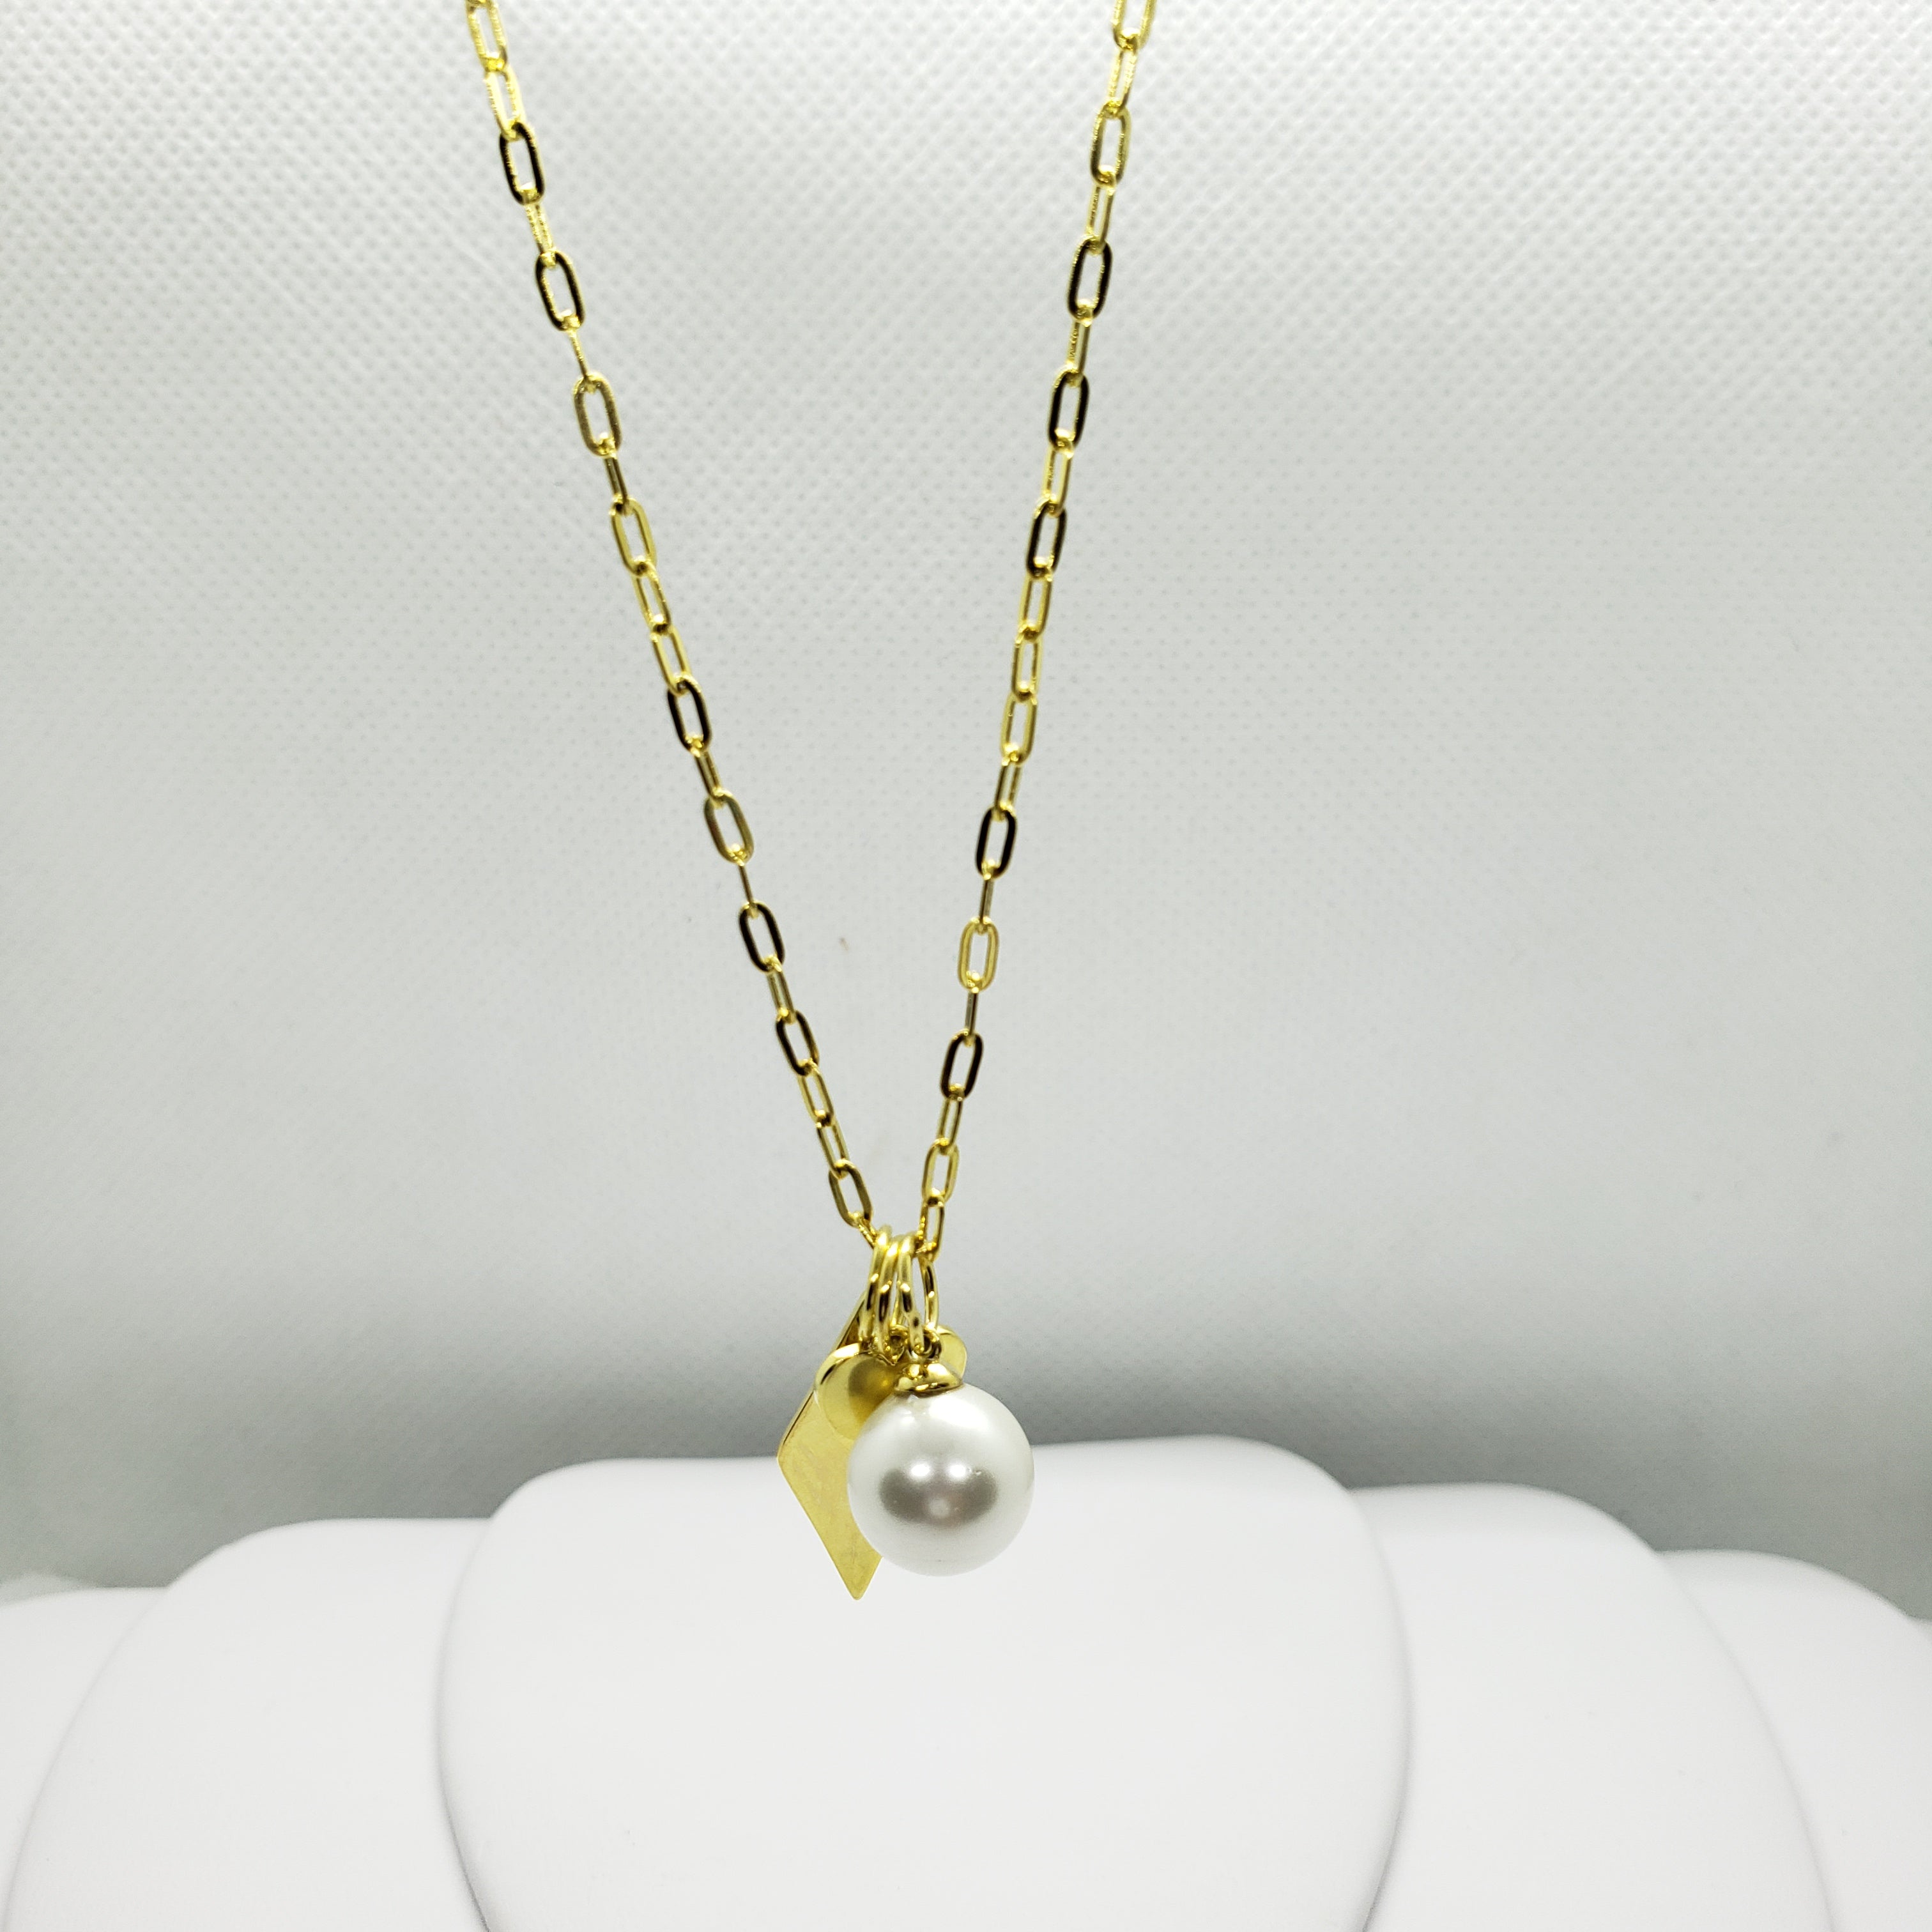 Necklace 005